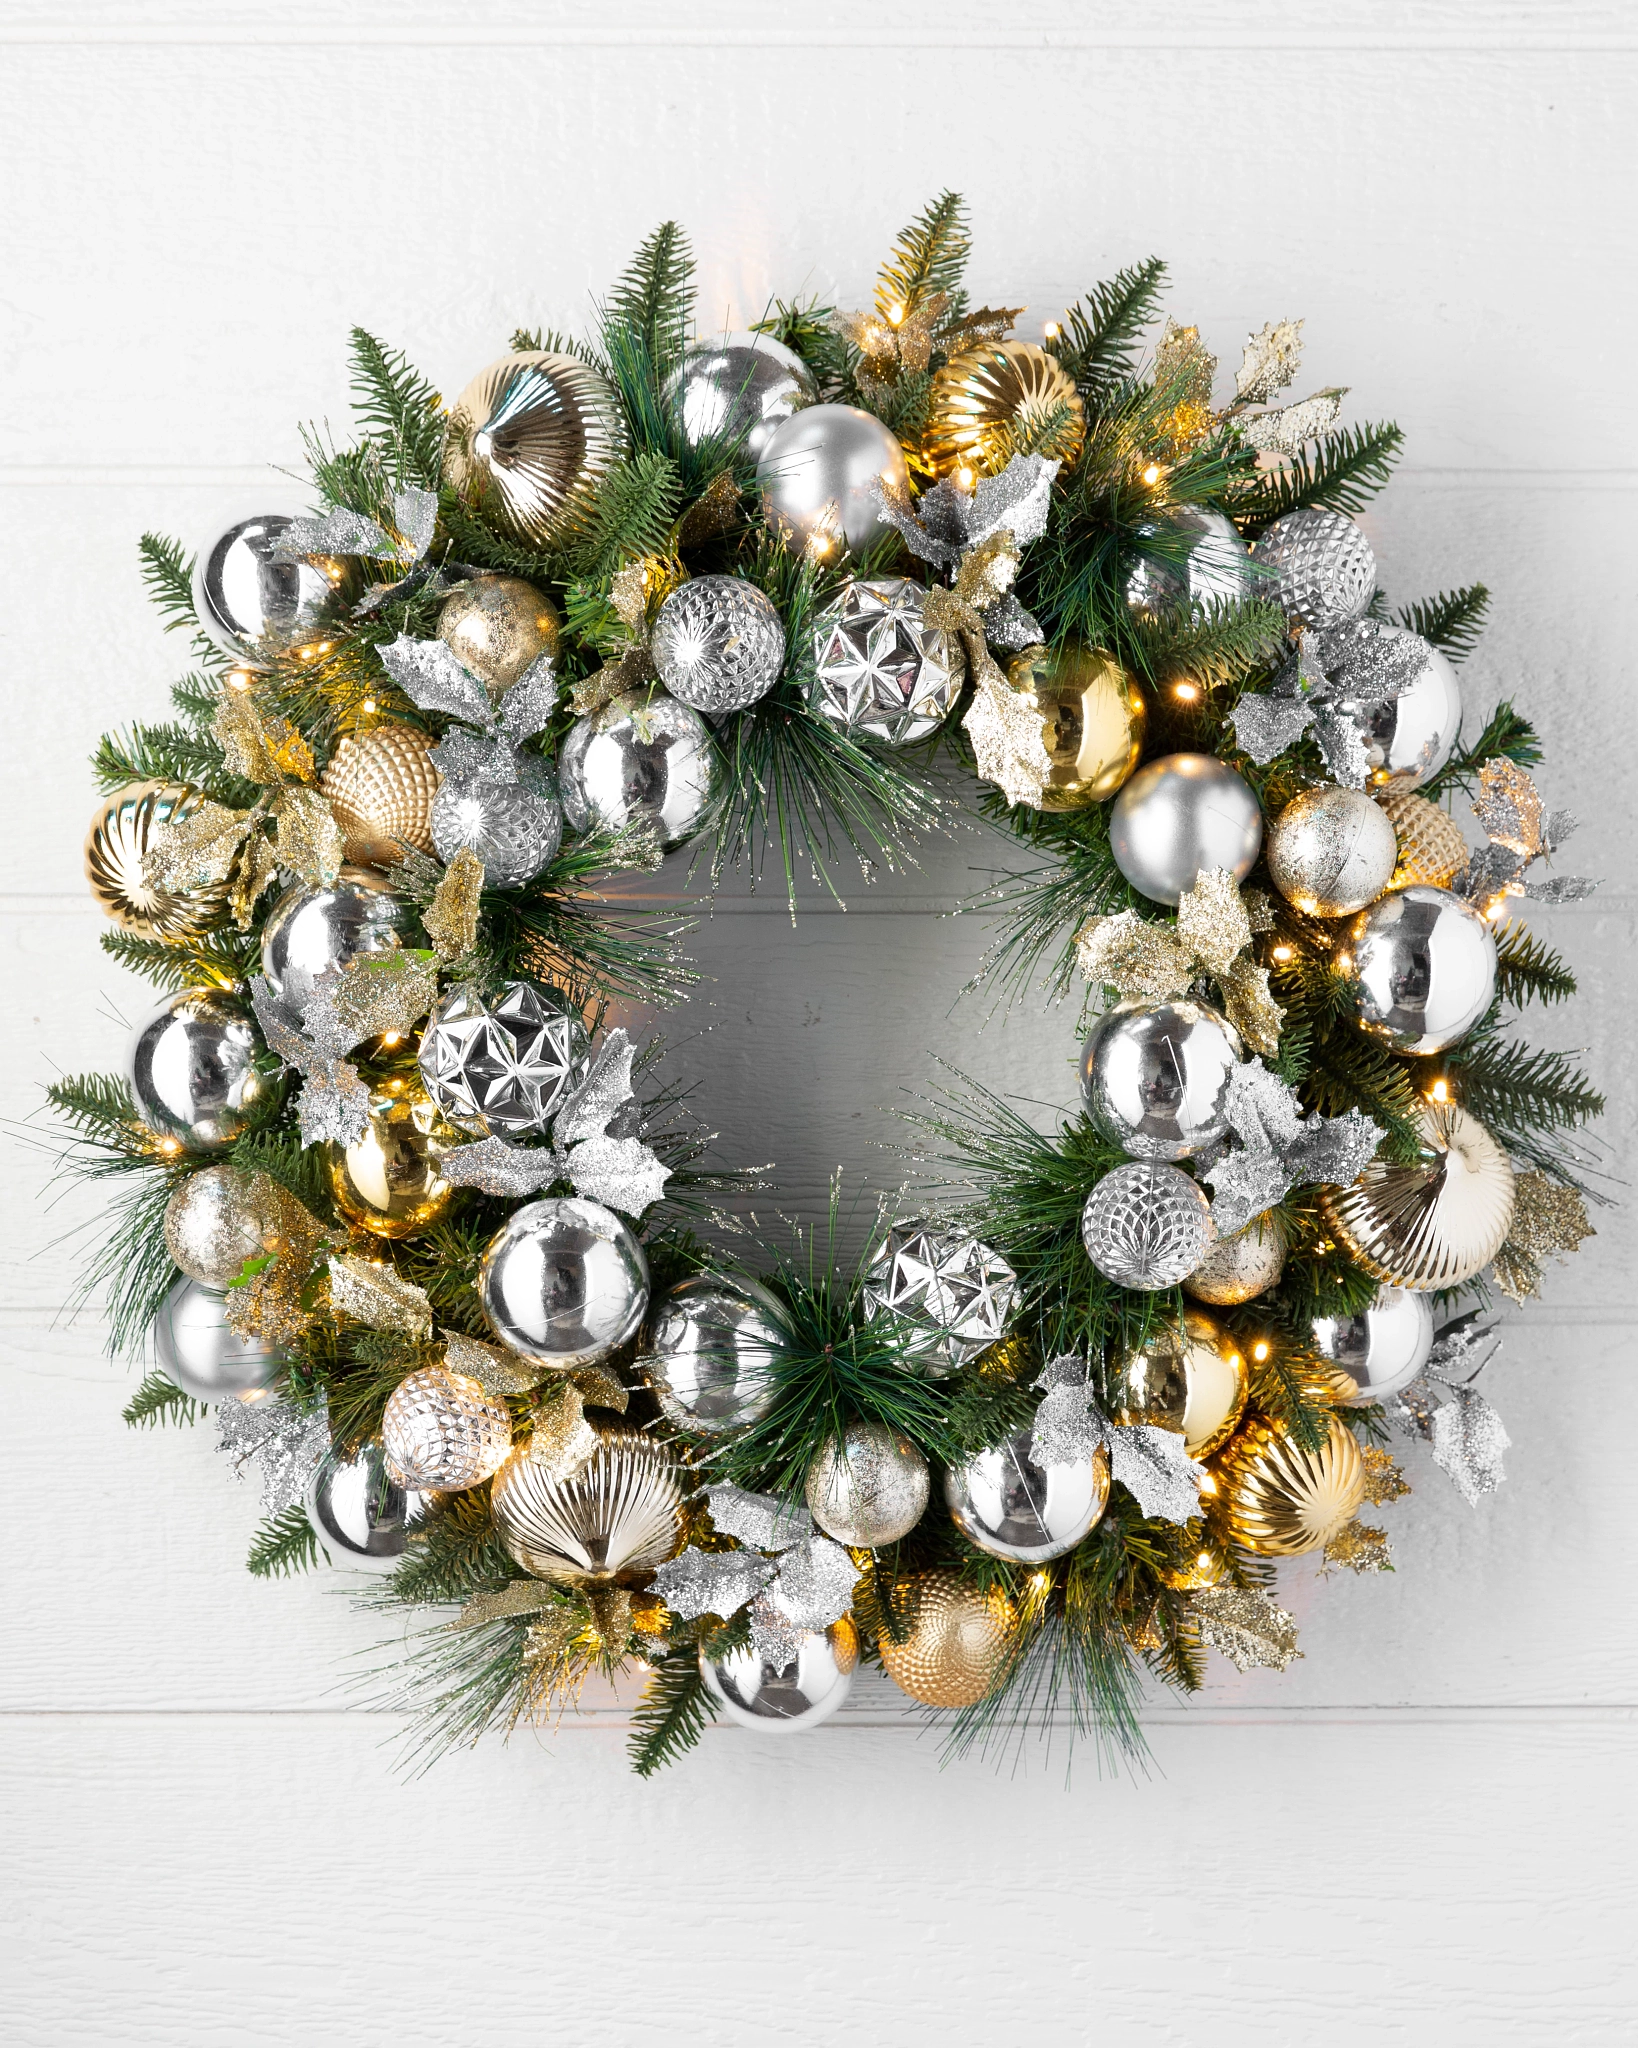 6 Metallic Gold, Silver, and White Garland 20' Sections